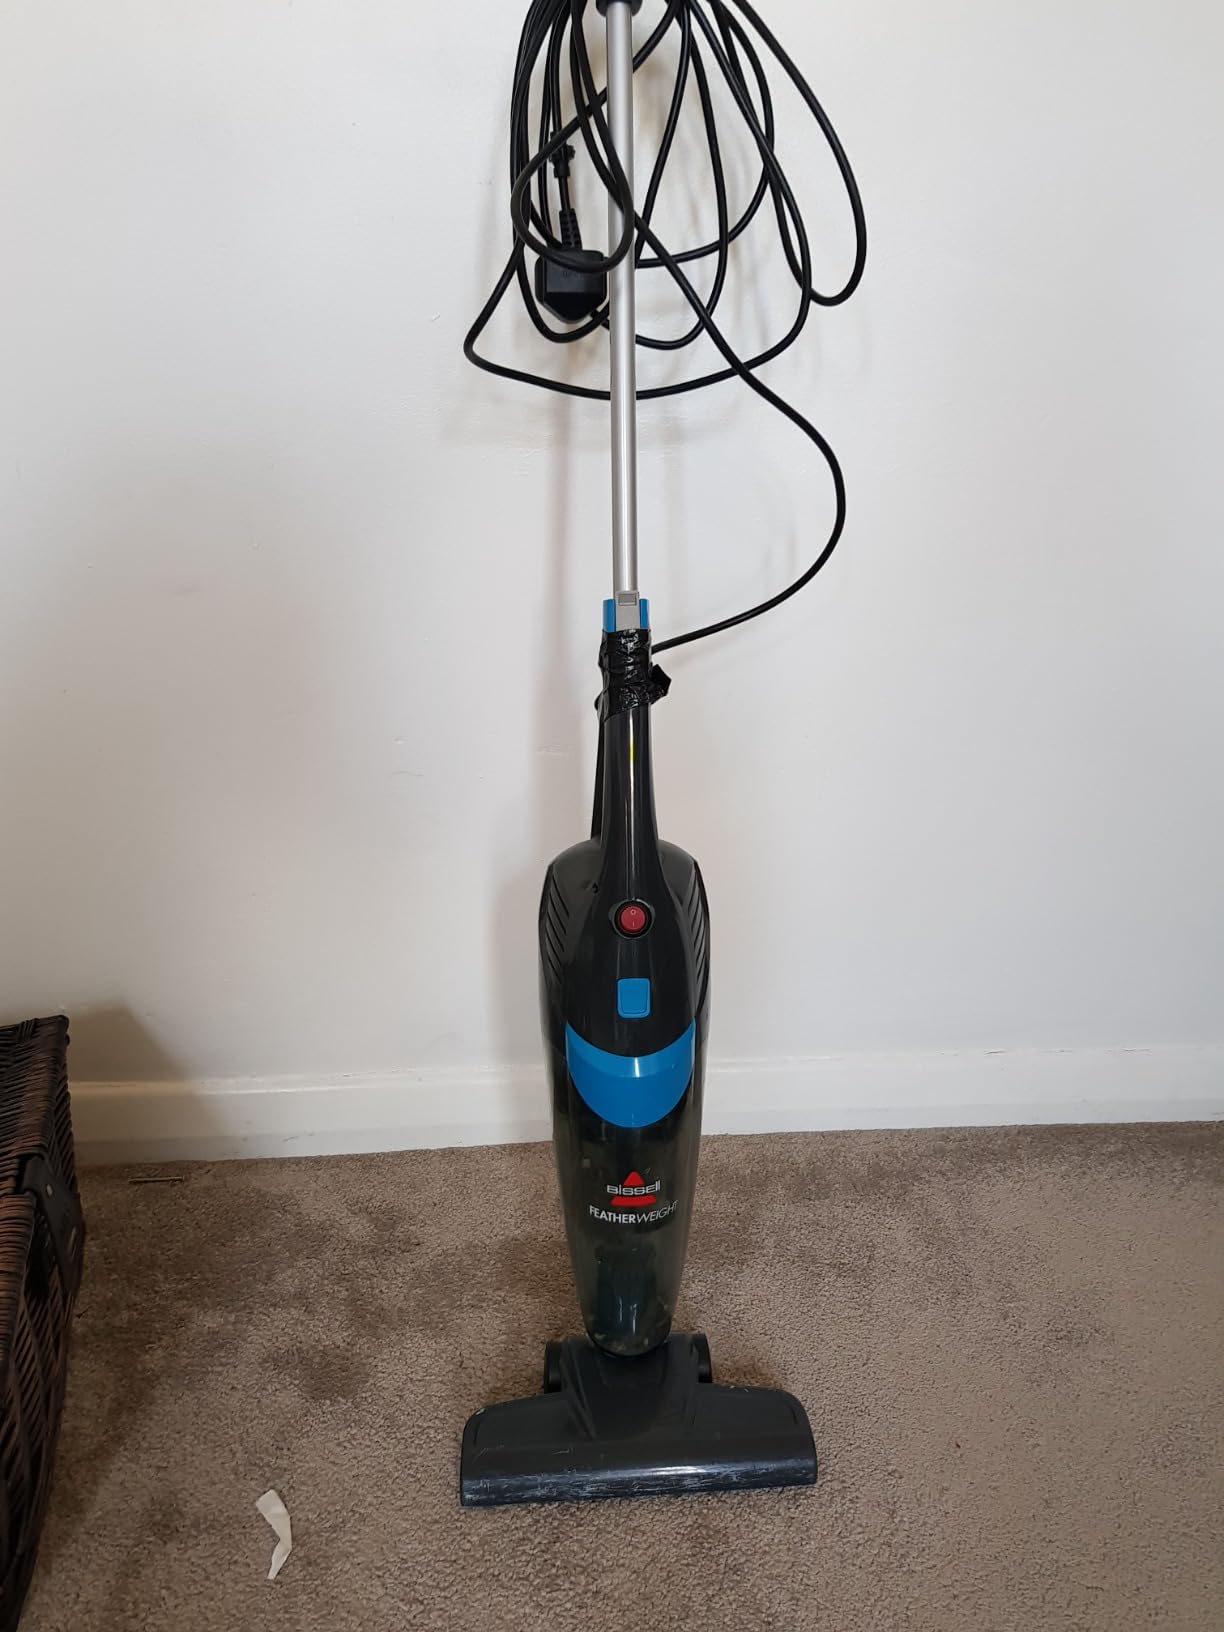  Bissell featherweight vacuum 2024e